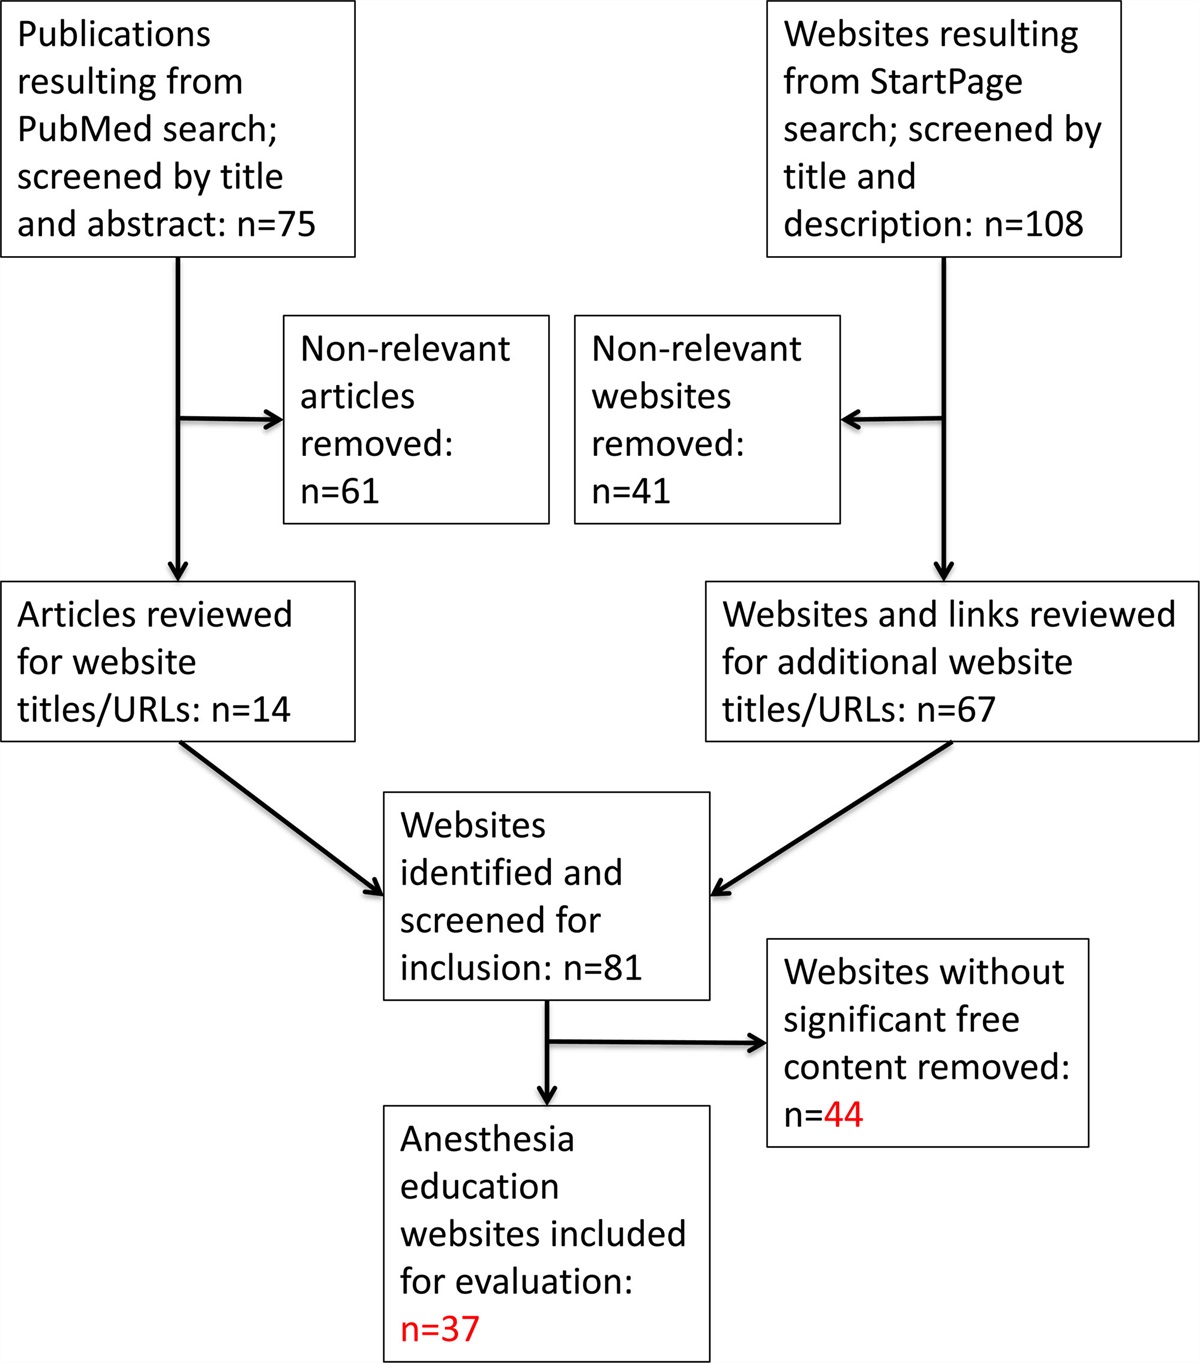 Evaluation of Open Access Websites for Anesthesia Education